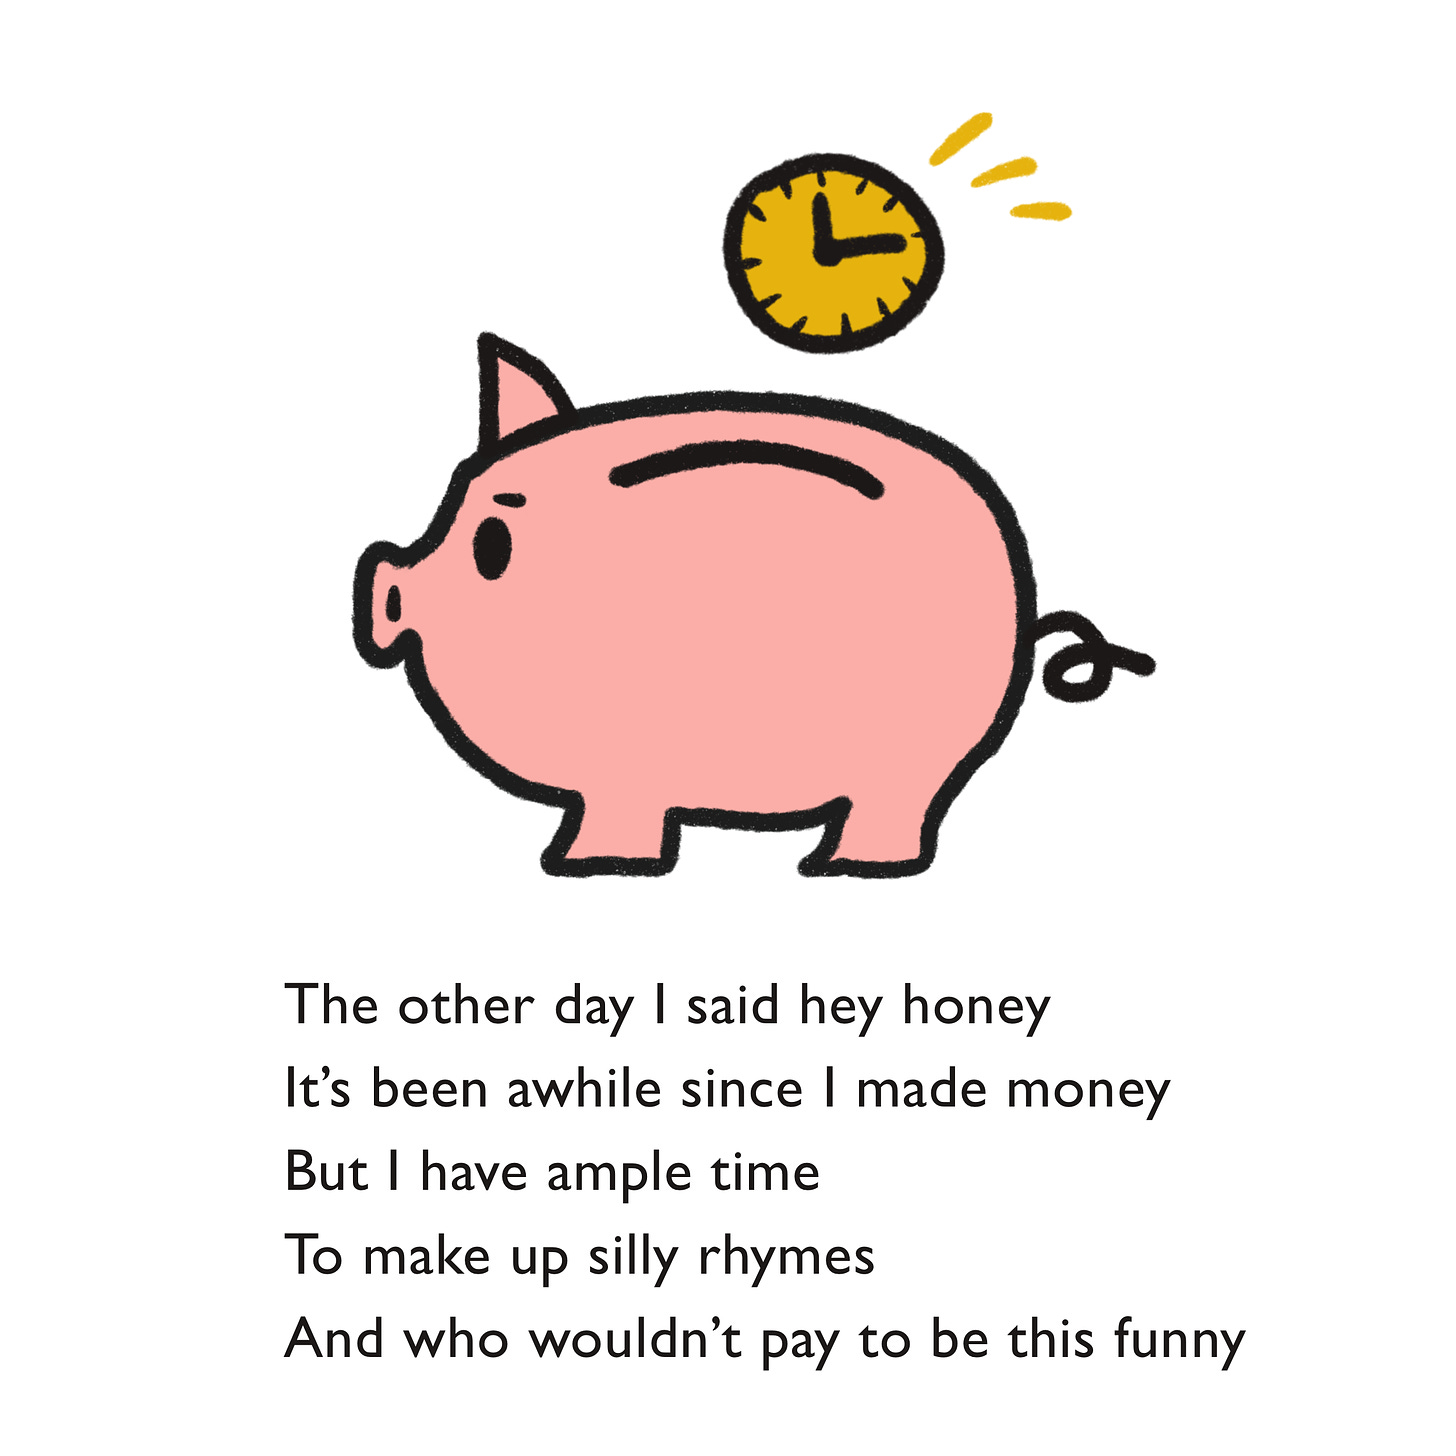 A hand-drawn illustration of a pink piggy bank. A yellow coin with the face of a clock is falling into the pig's back.